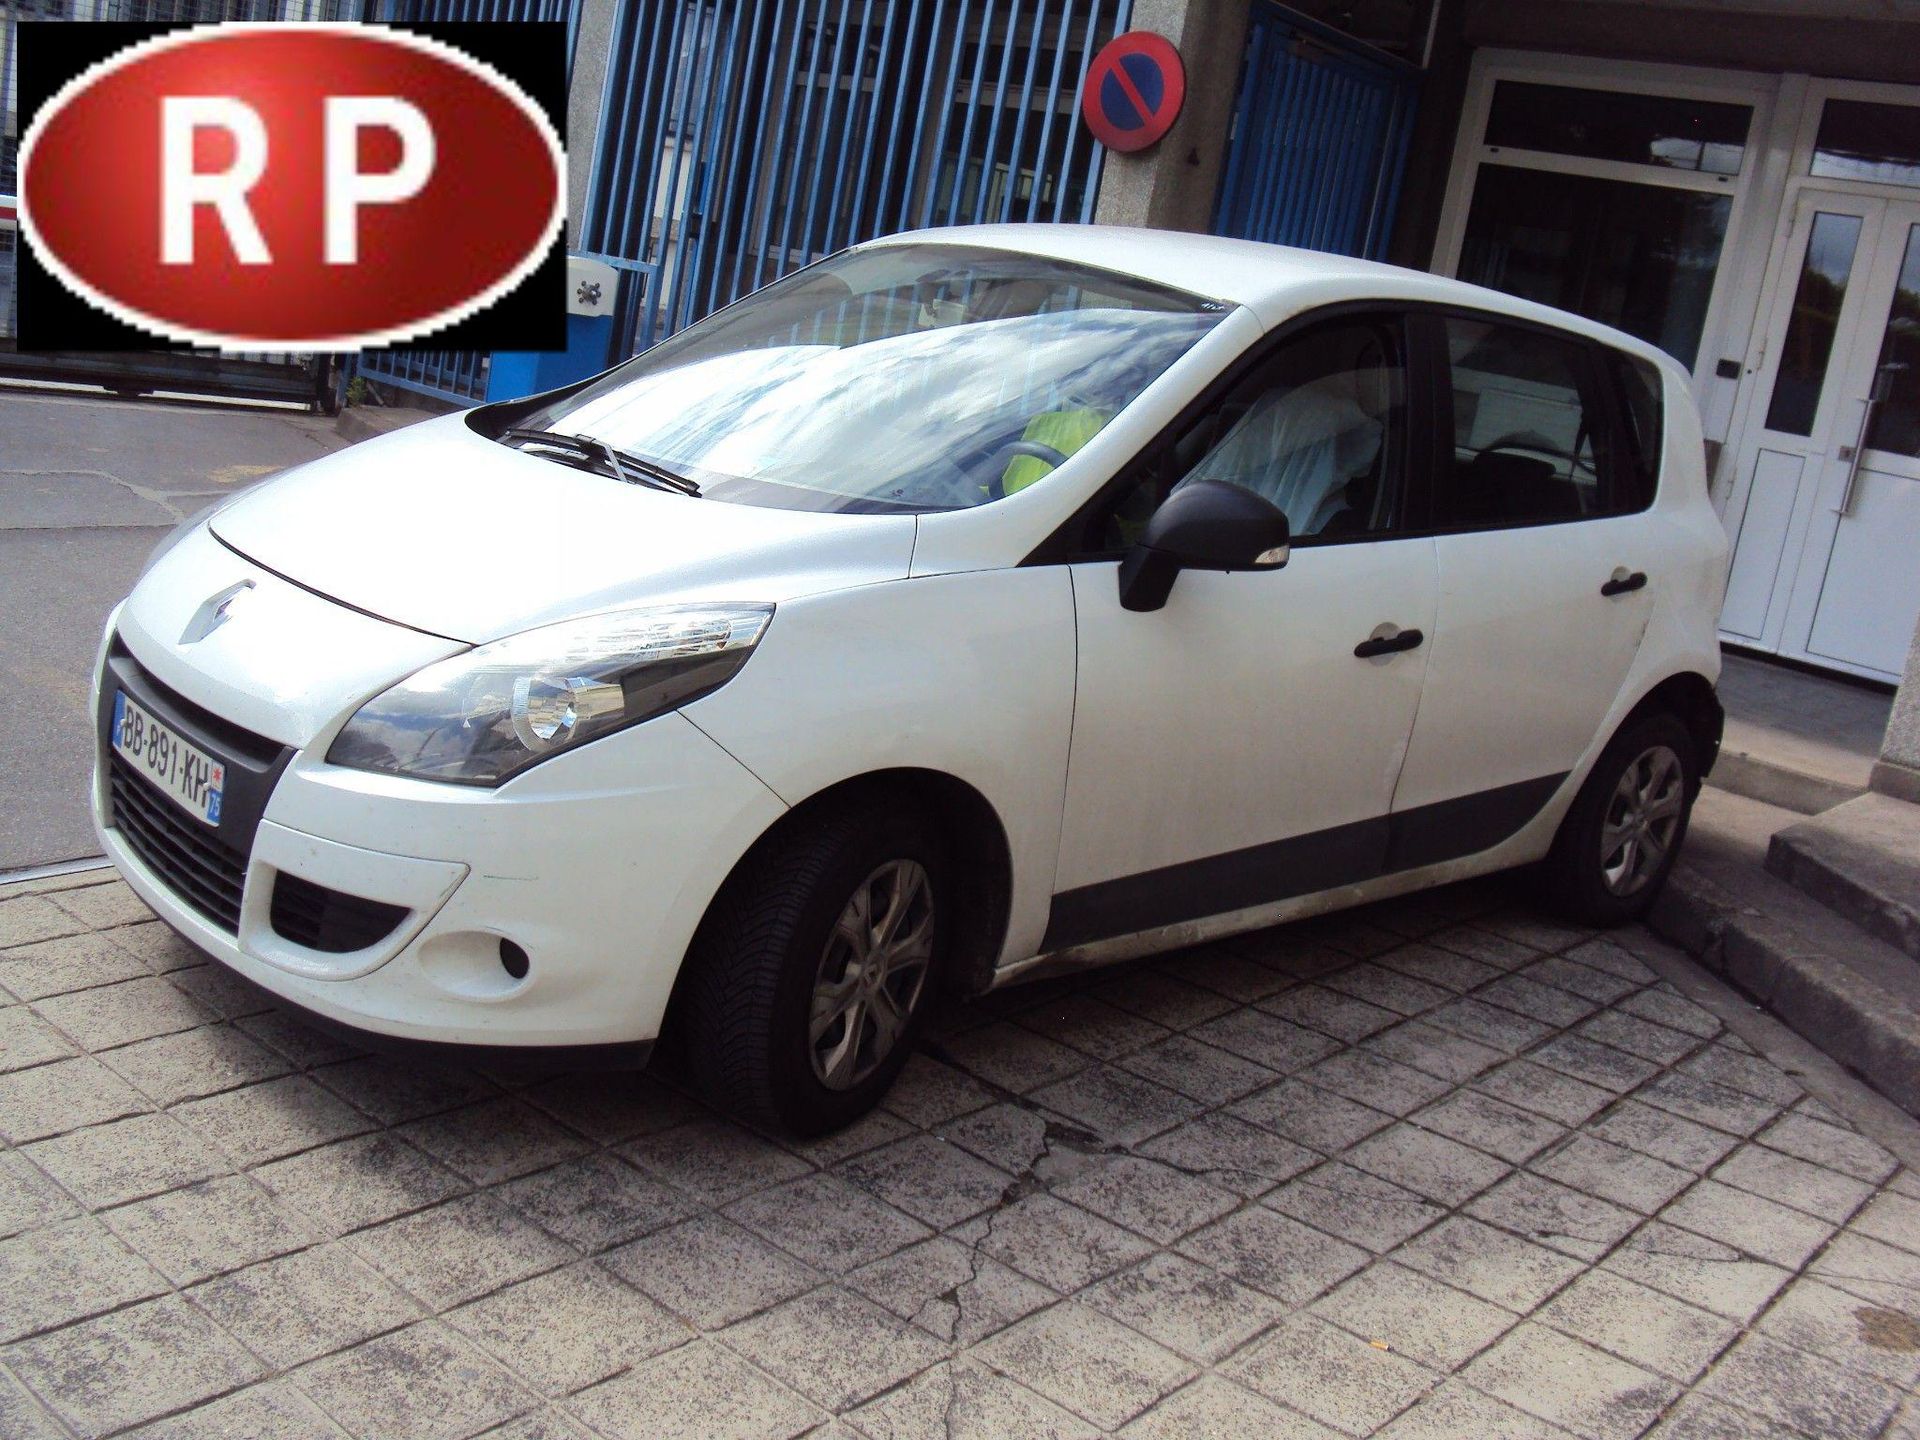 Null [RP] RENAULT MEGANE SCENIC 1.5 dCi eco2 106, Gazole, 5 places, imm. BB-891-&hellip;